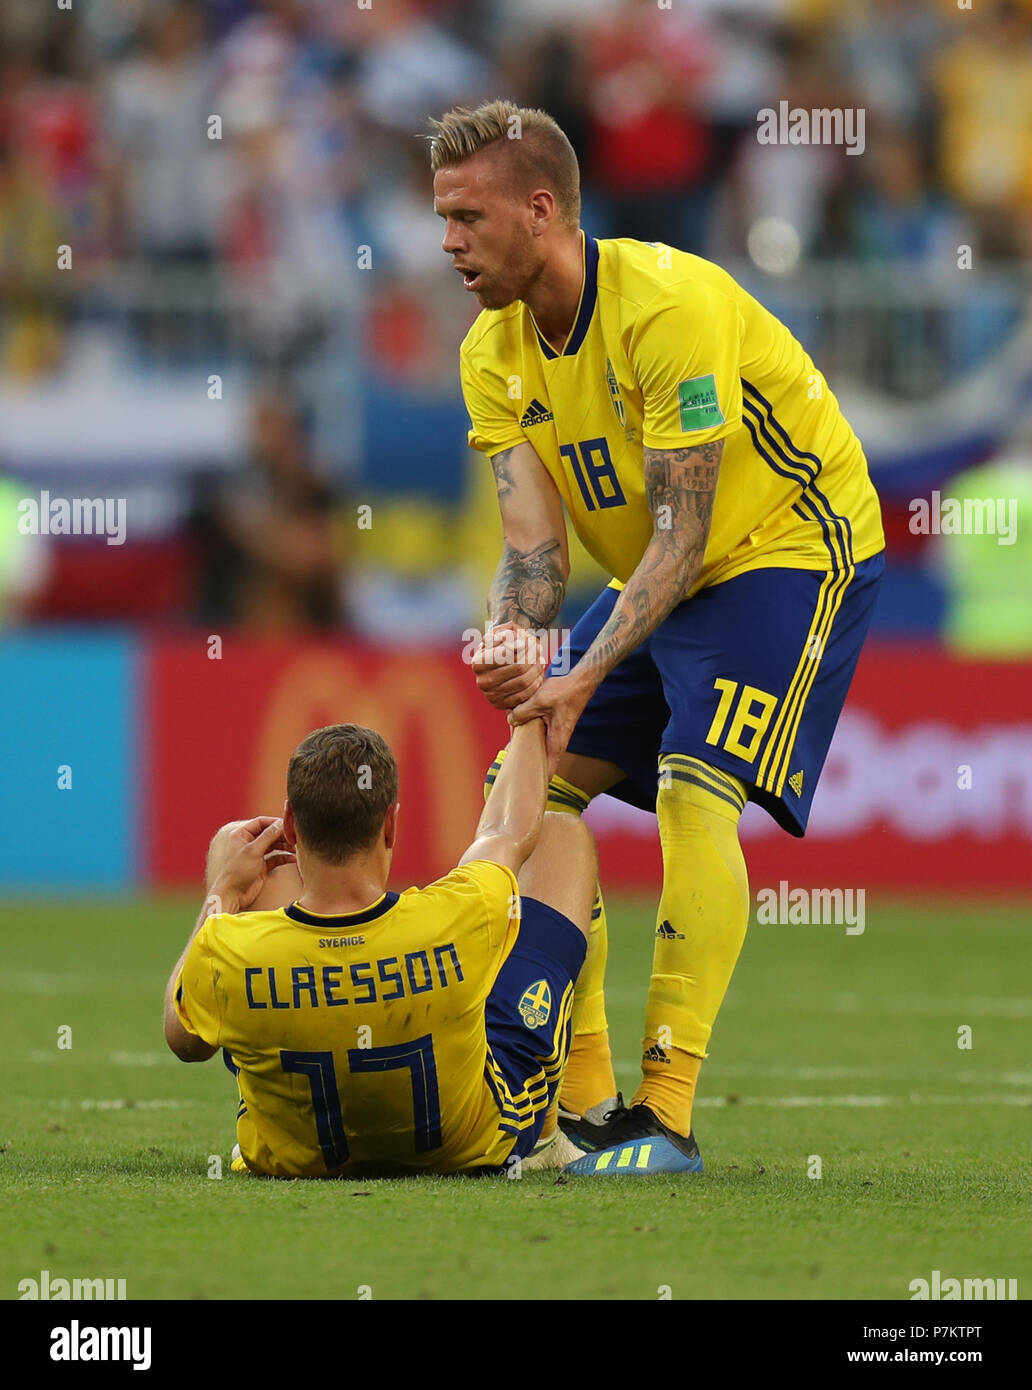 Samara, Russia. 7th July, 2018. Sweden's Pontus Jansson (R) pulls up Viktor Claesson after the 2018 FIFA World Cup quarter-final match between Sweden and England in Samara, Russia, July 7, 2018. England won 2-0 and advanced to the semi-finals. Credit: Lu Jinbo/Xinhua/Alamy Live News Stock Photo